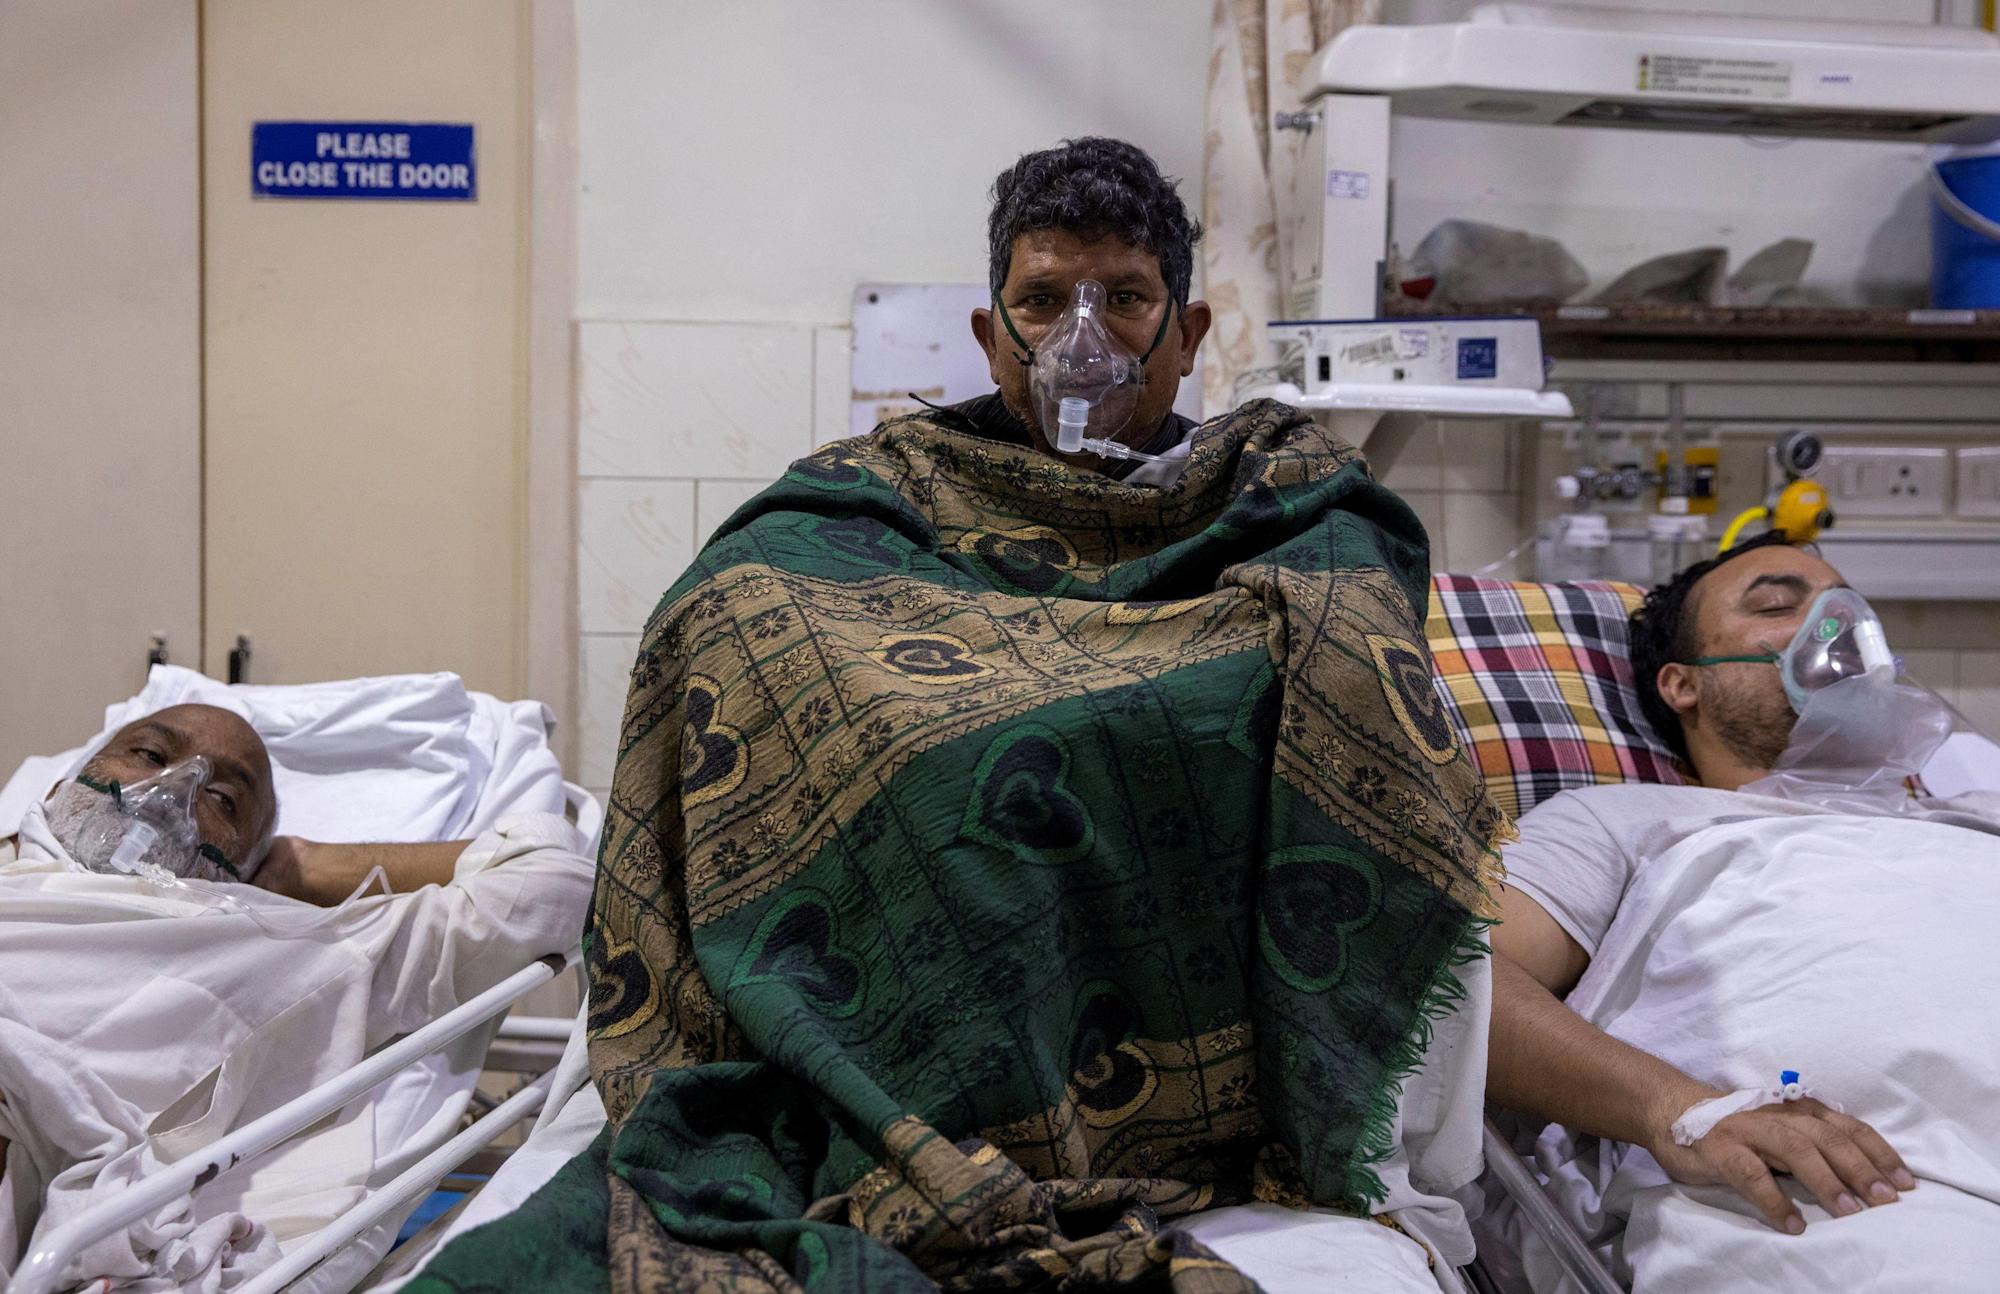 Patients suffering from the coronavirus disease (COVID-19) receive treatment inside the emergency ward at Holy Family hospital in New Delhi, India, April 29, 2021. REUTERS/Danish Siddiqui